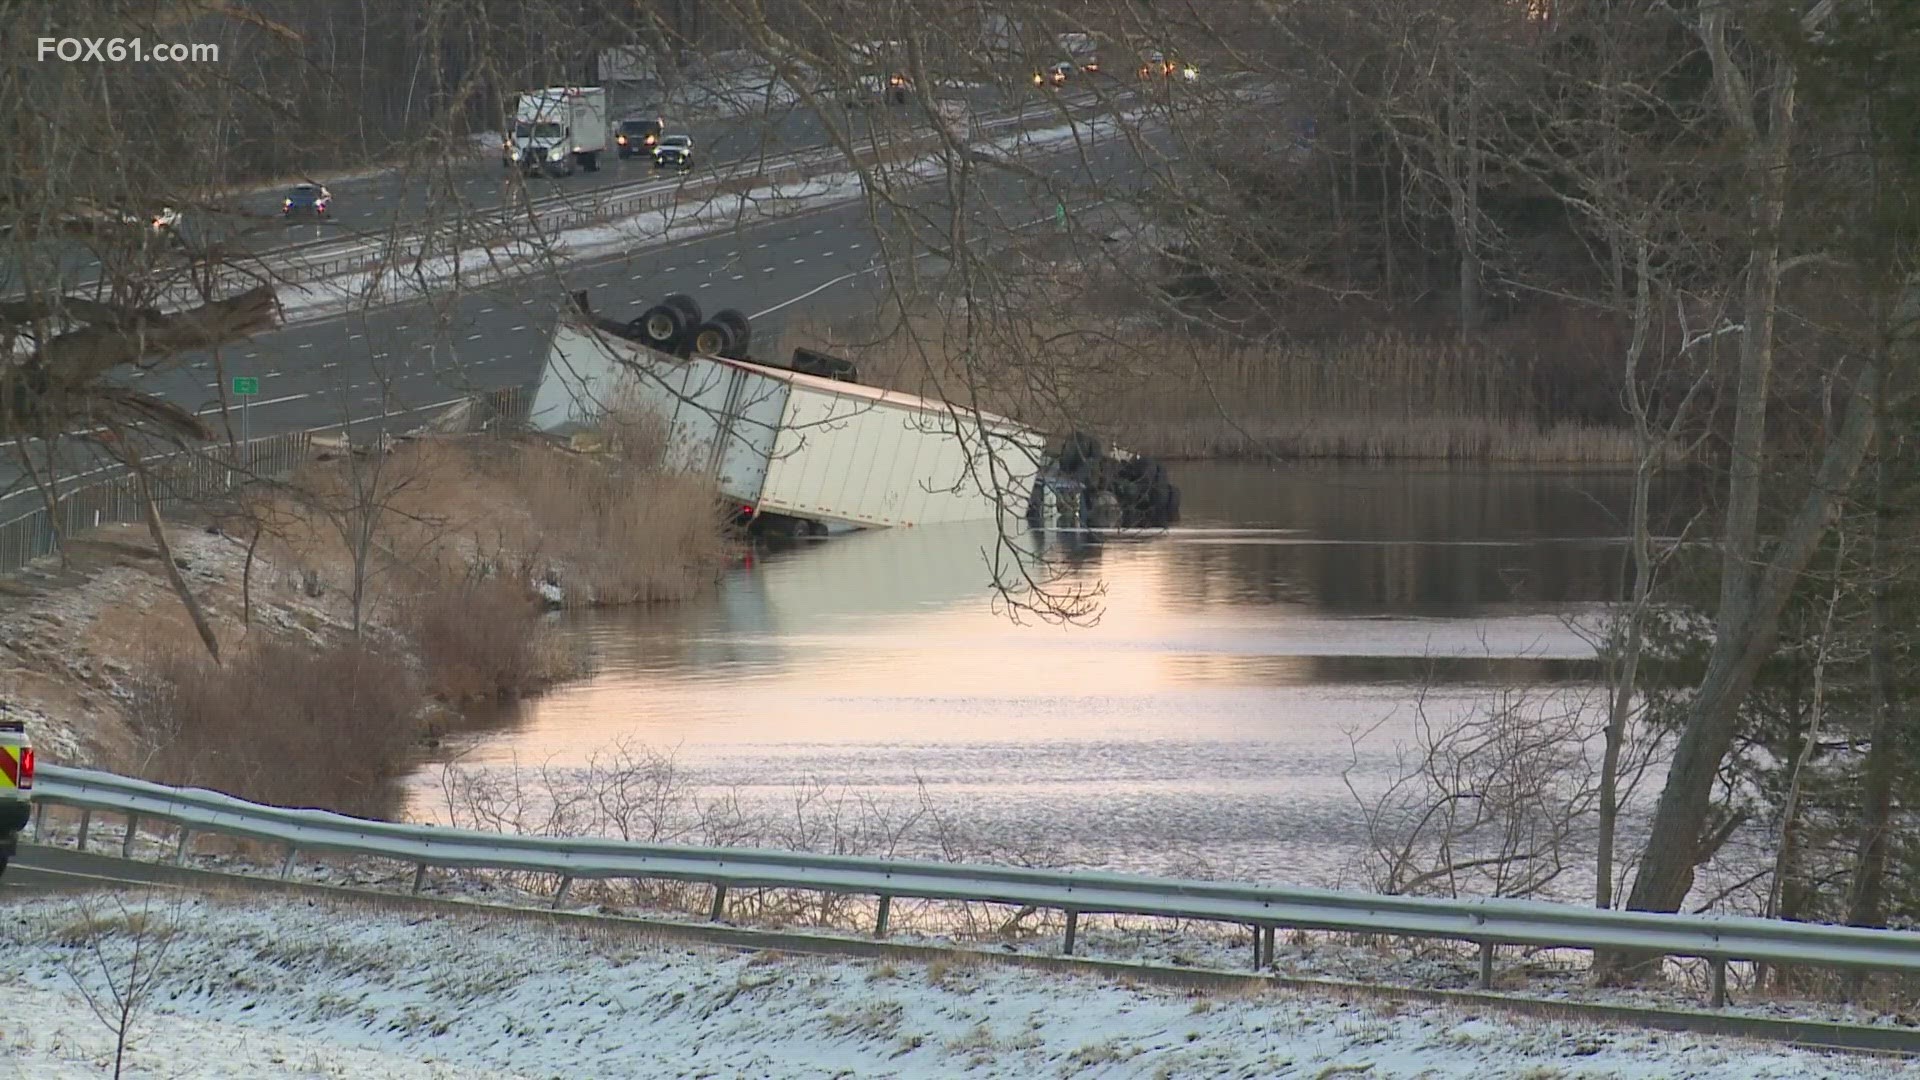 The crash happened just after Exit 72 when the truck crashed into Morey Pond off the side of the highway.